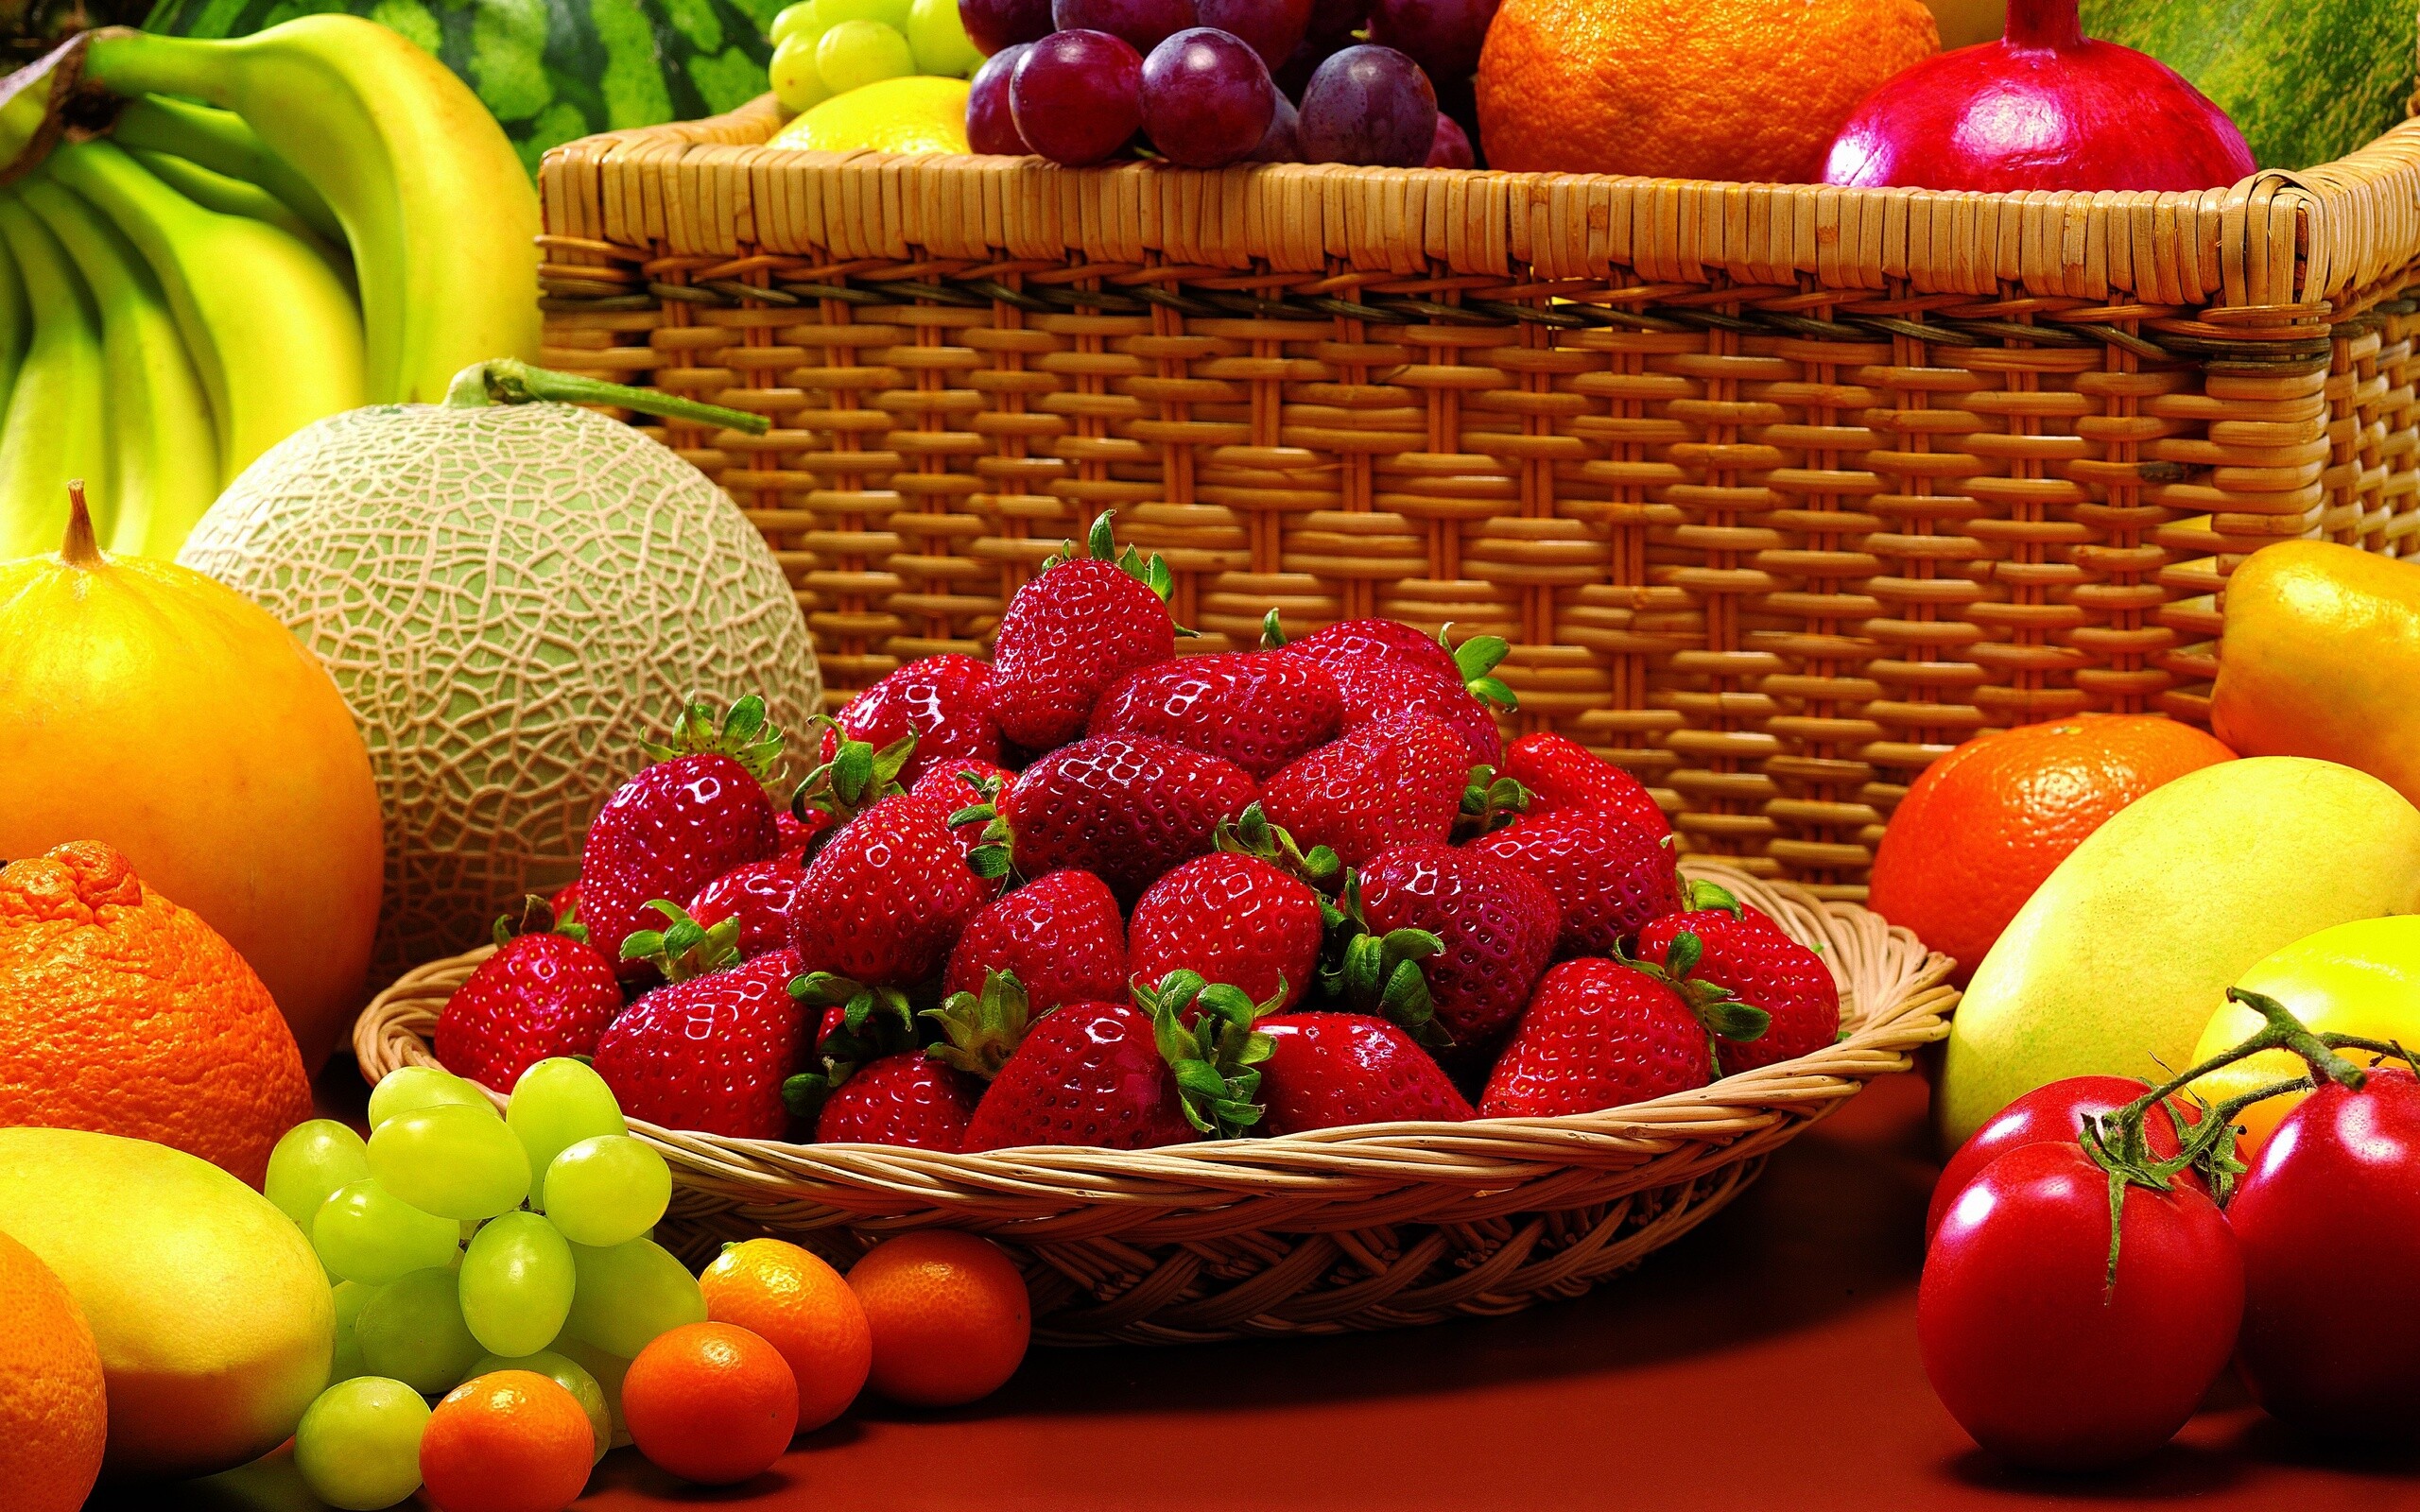 Fruit: The fleshy or dry ripened ovary of a flowering plant, Strawberries, Grapes, Banana. 2560x1600 HD Wallpaper.